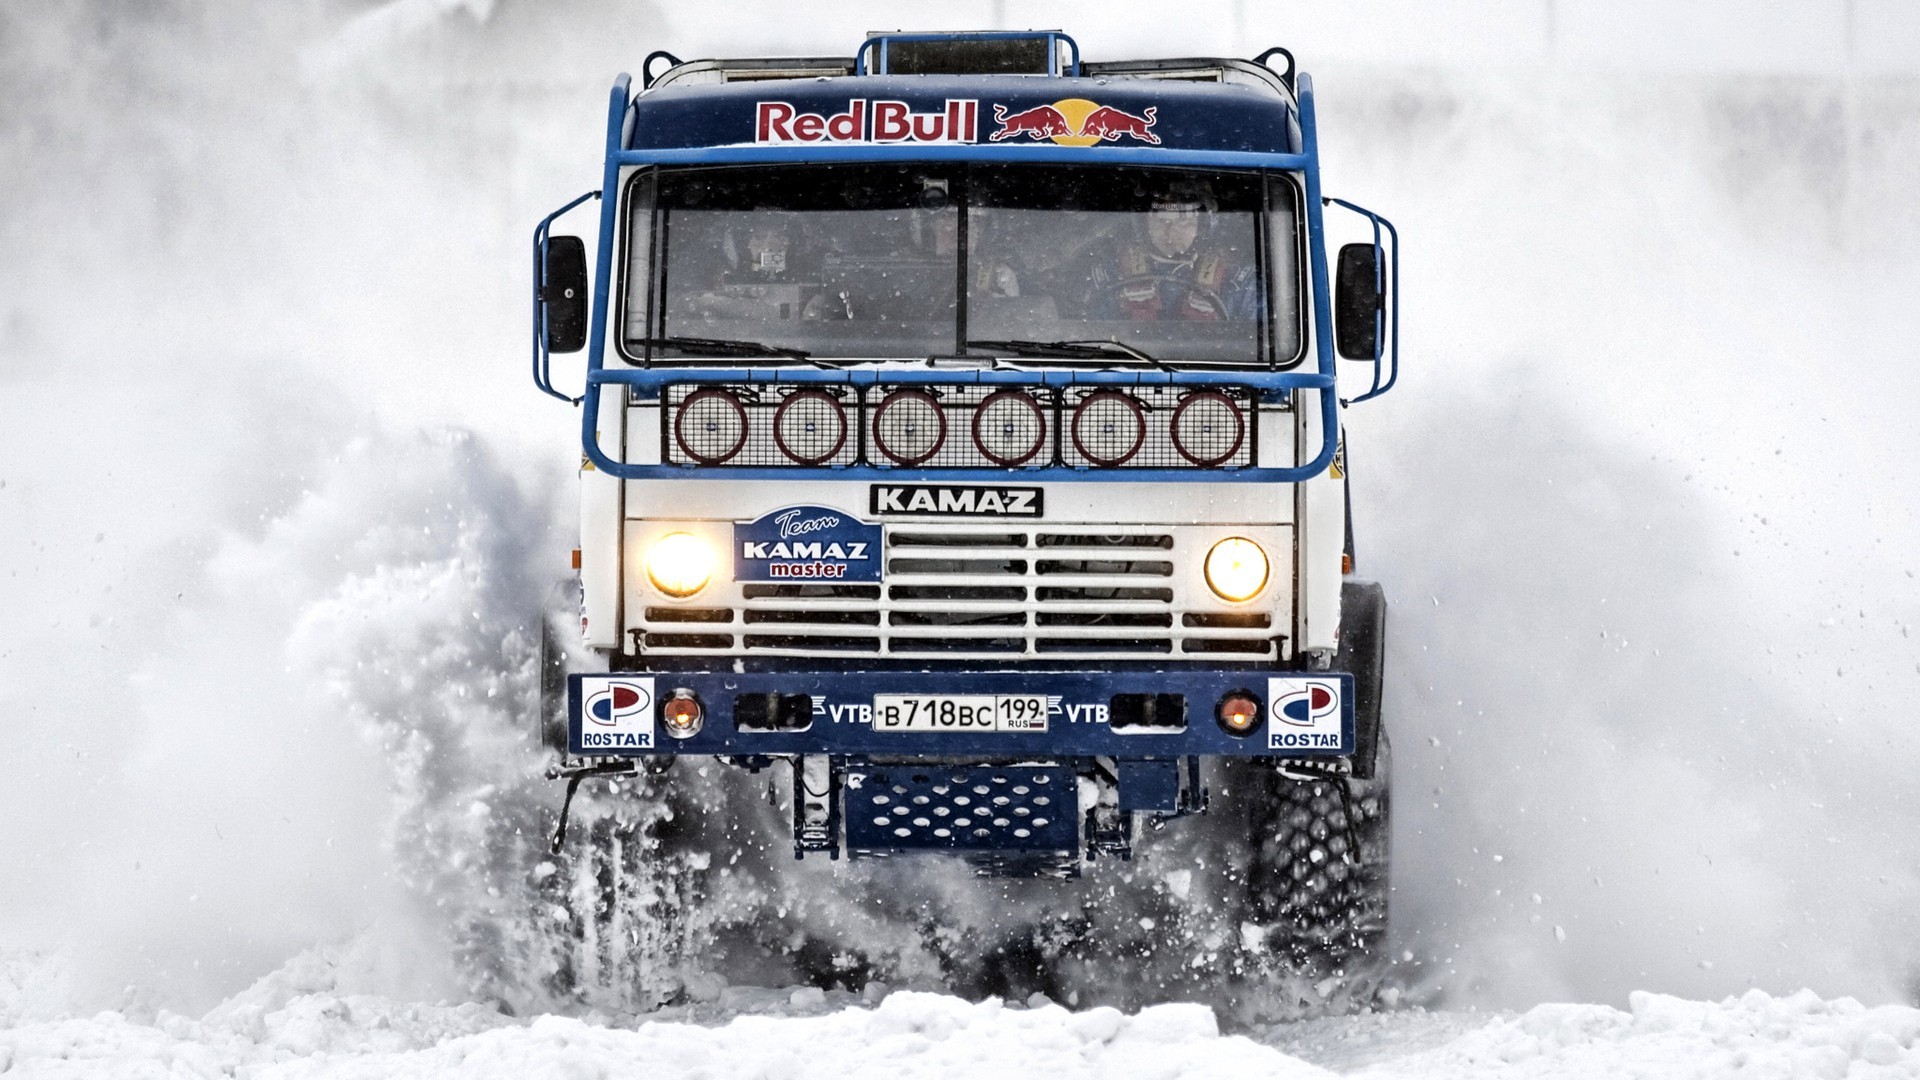 General 1920x1080 snow Kamaz truck vehicle frontal view rally cars white Russian Russian trucks